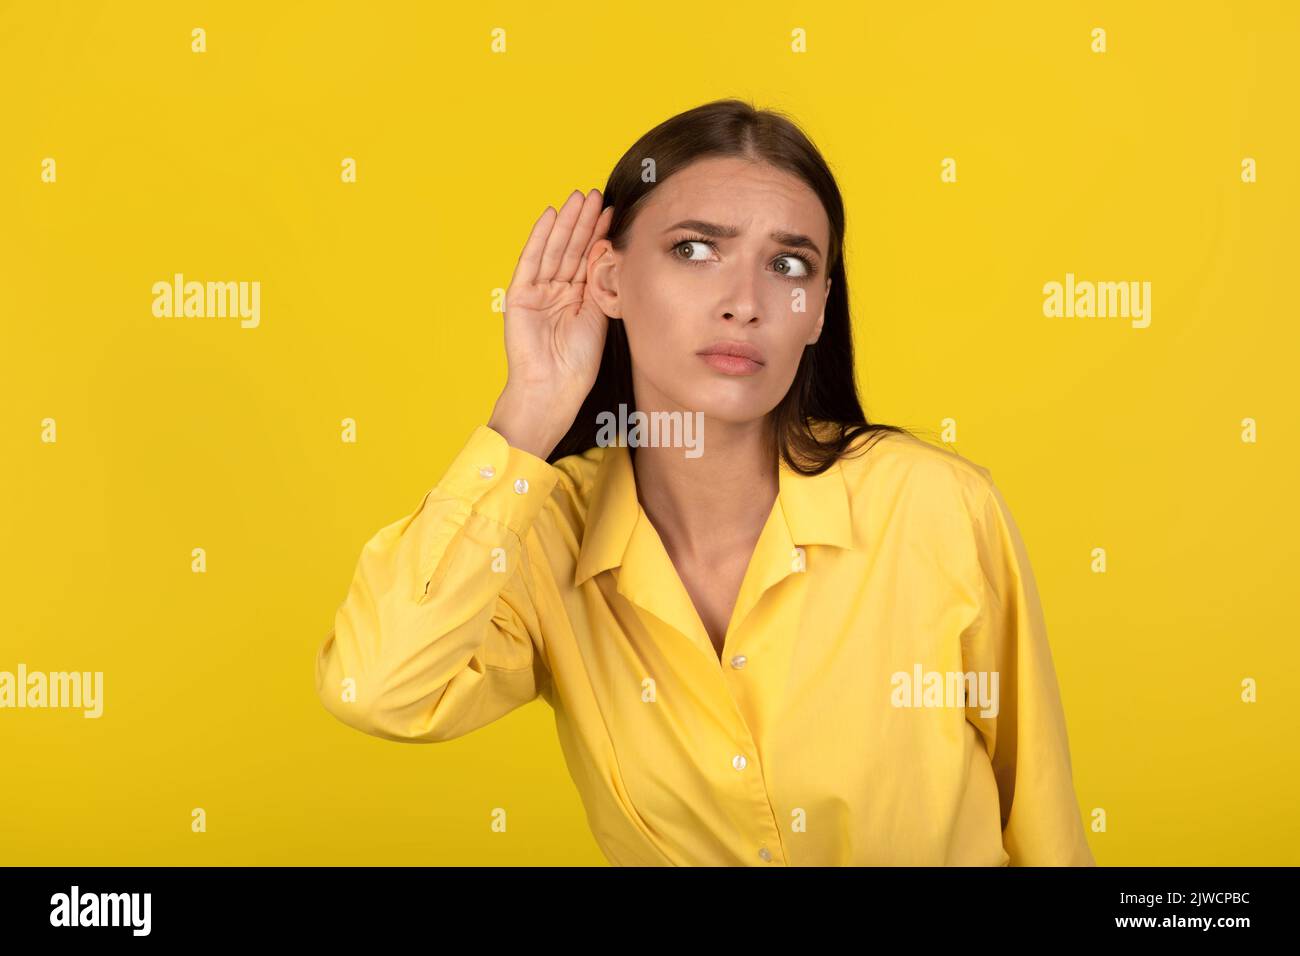 Concerned Female Eavesdropping Holding Hand Near Ear Over Yellow Background Stock Photo